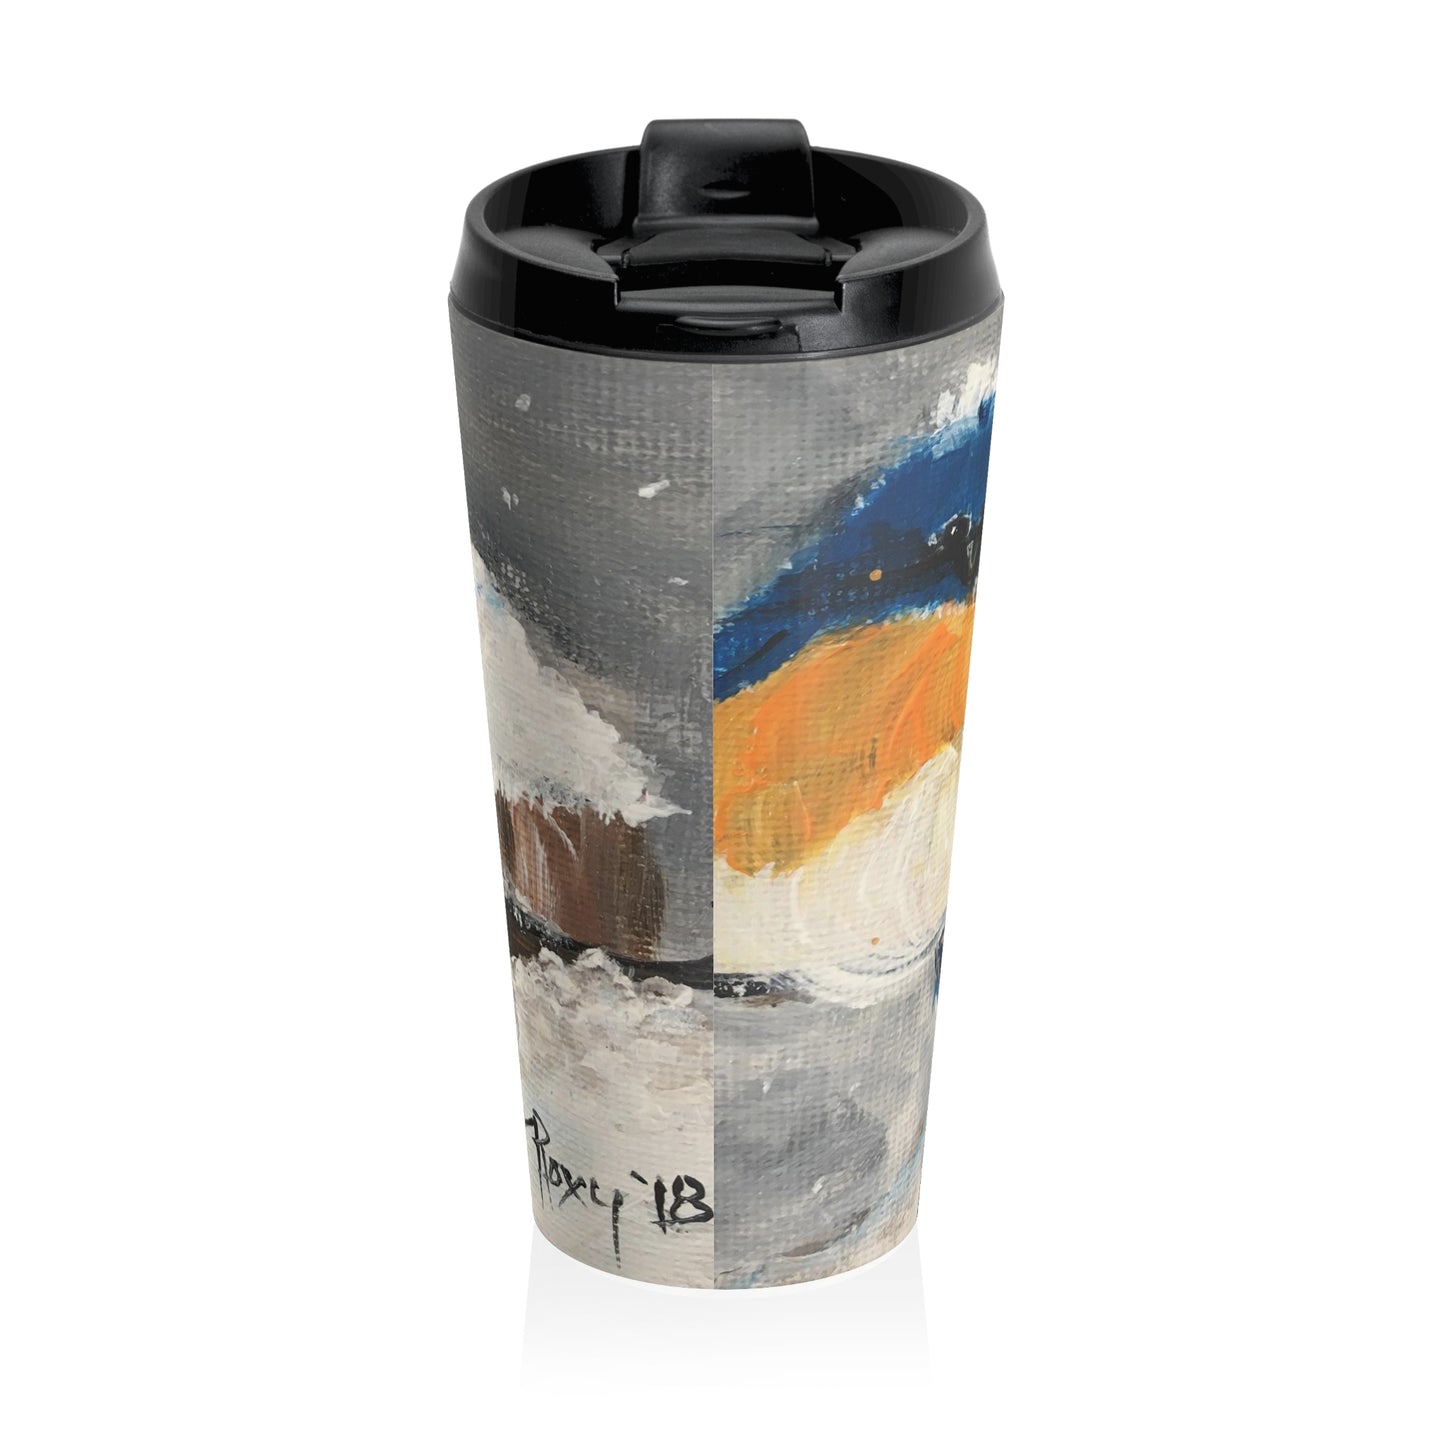 Fluffy Fat Bluebird perched on a Barbed Wire in Snow Stainless Steel Travel Mug